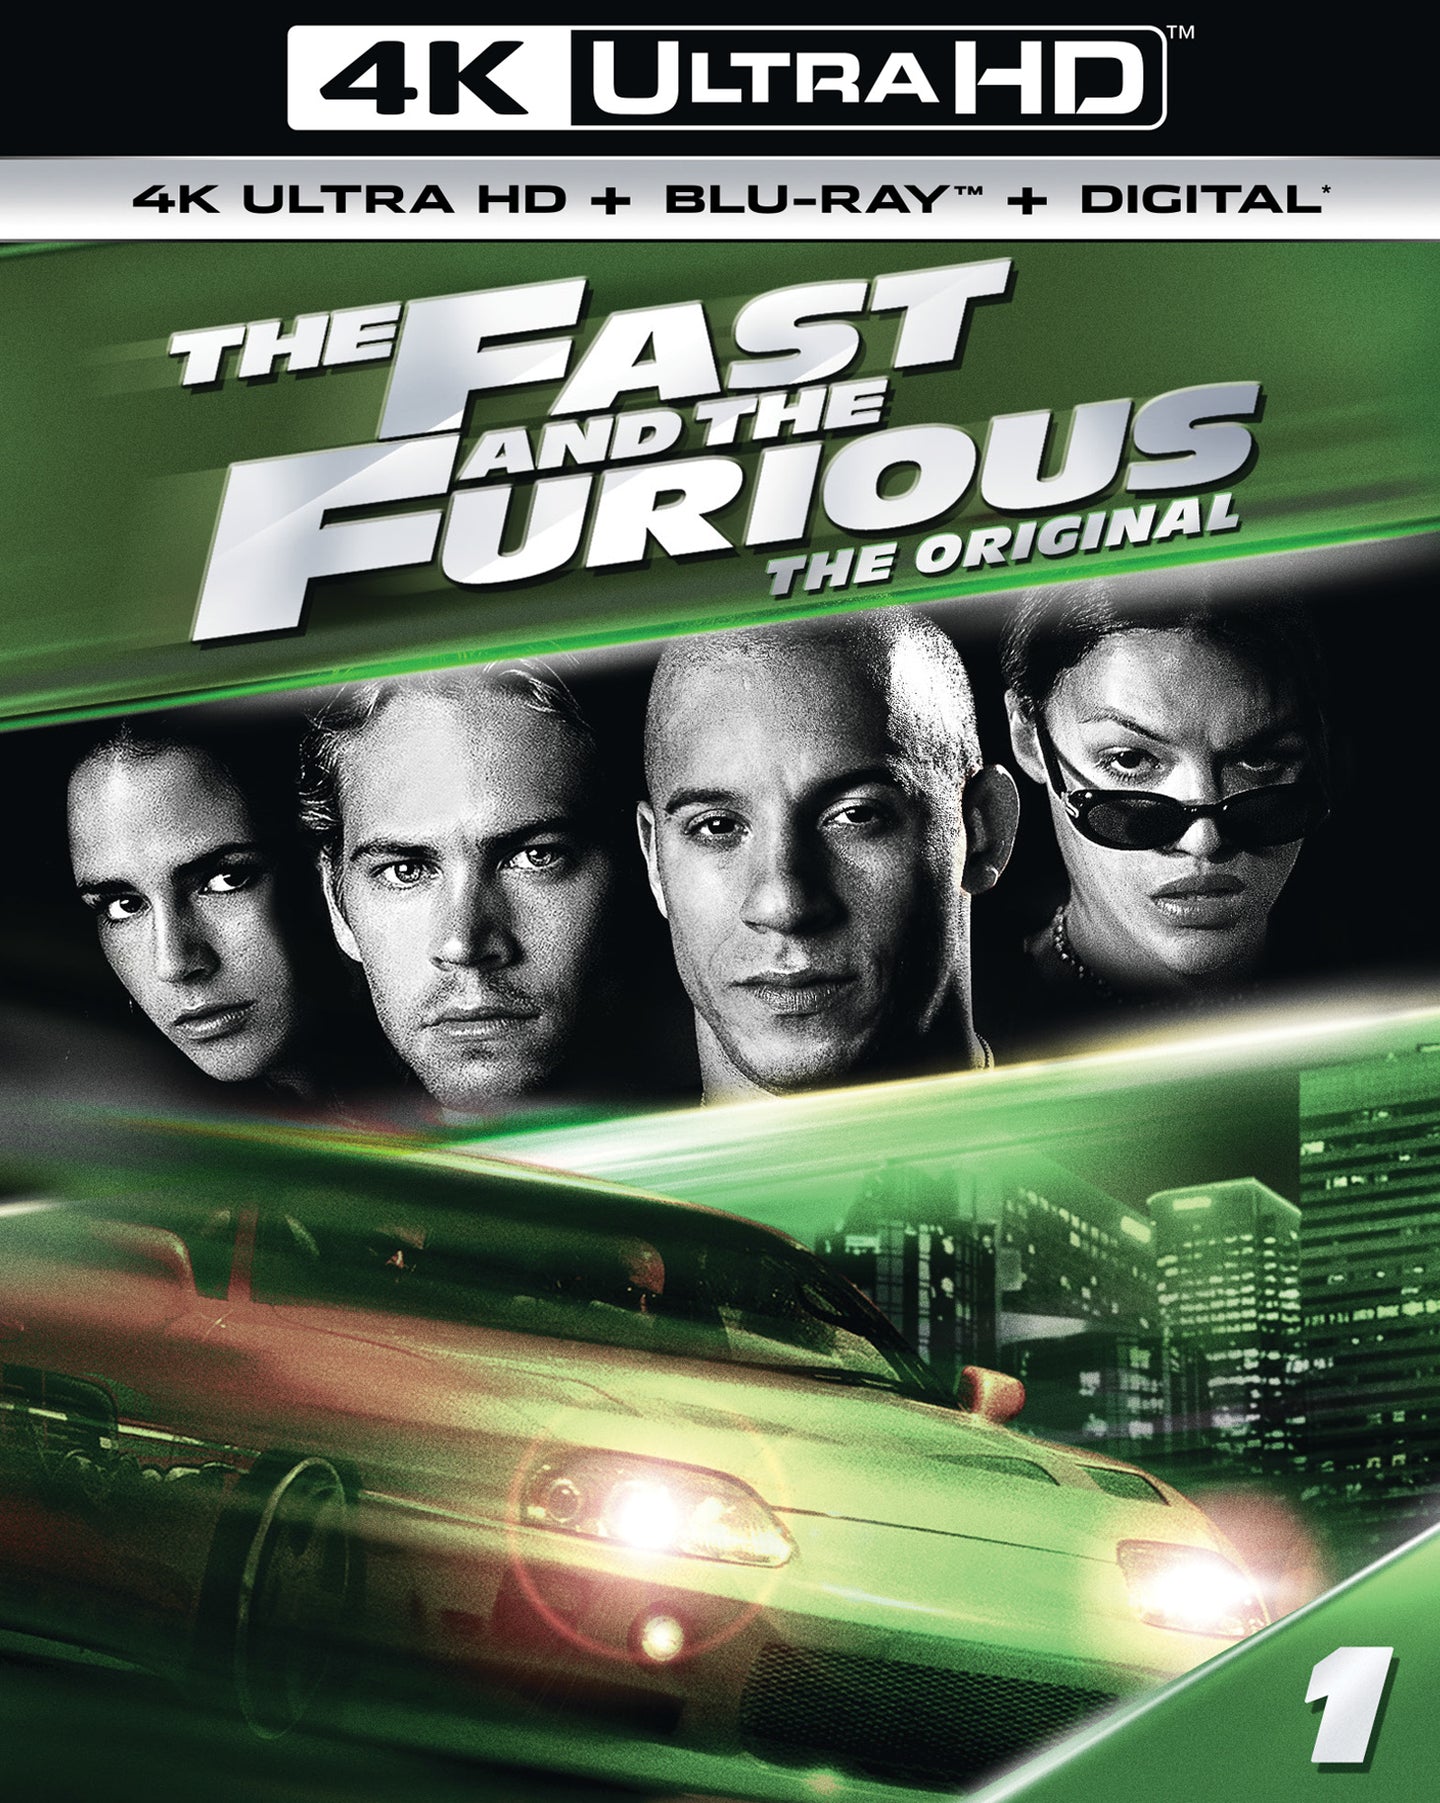 The Fast and the Furious (2001: Ports Via MA) iTunes 4K code